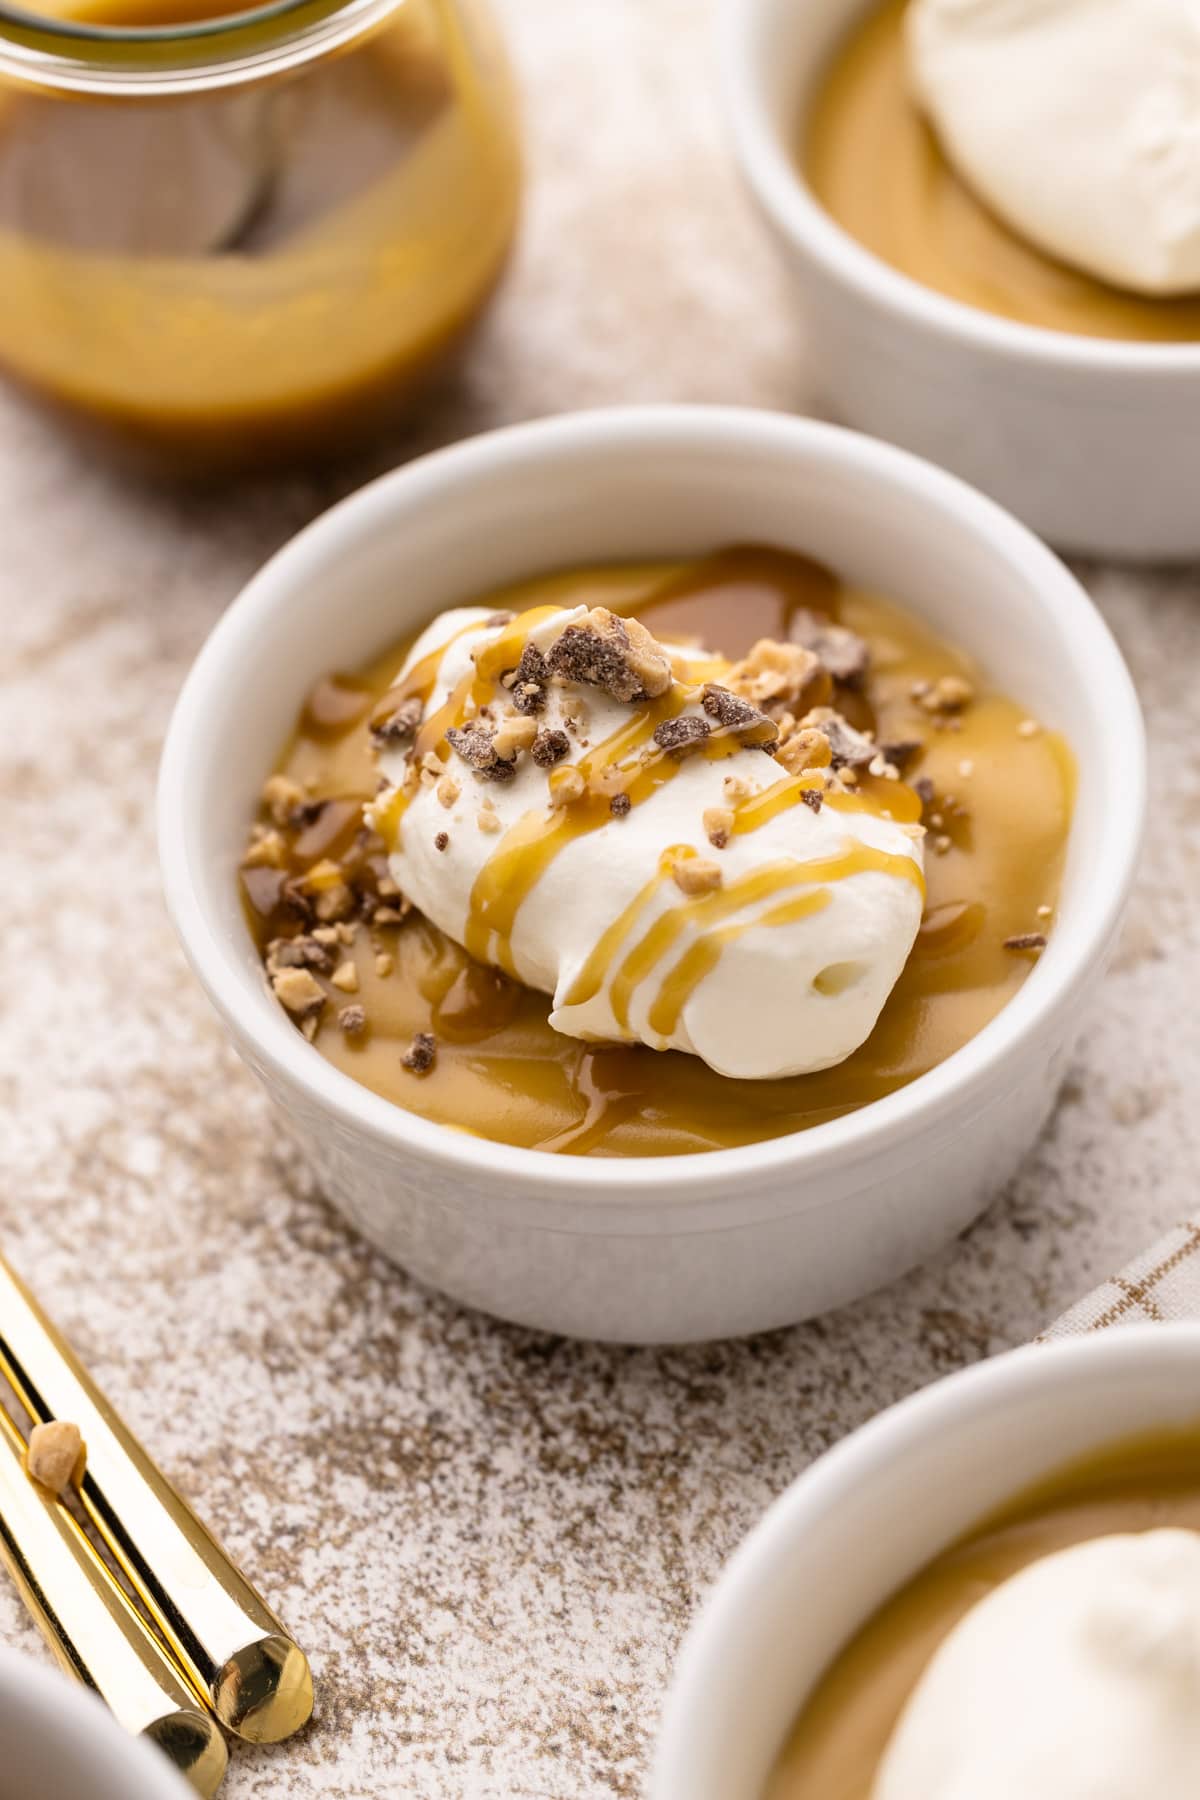 A small white bowl of homemade butterscotch pudding with whipped cream and chopped toffee.